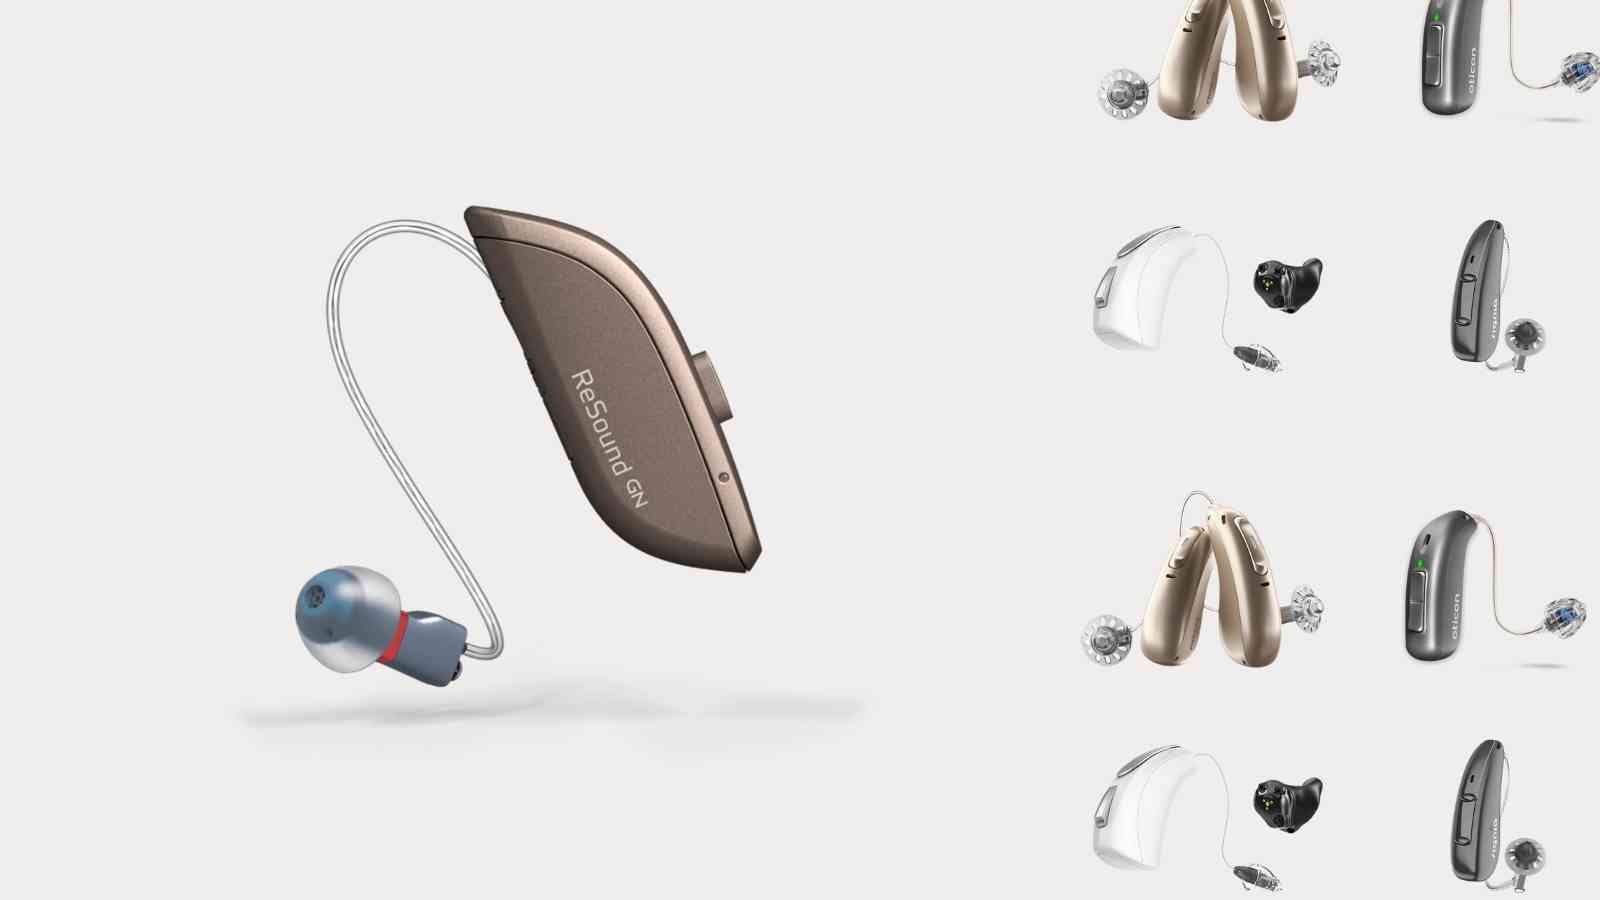 Image of ReSound hearing aids compared to other brands like Starkey, Signia, Phonak and Oticon